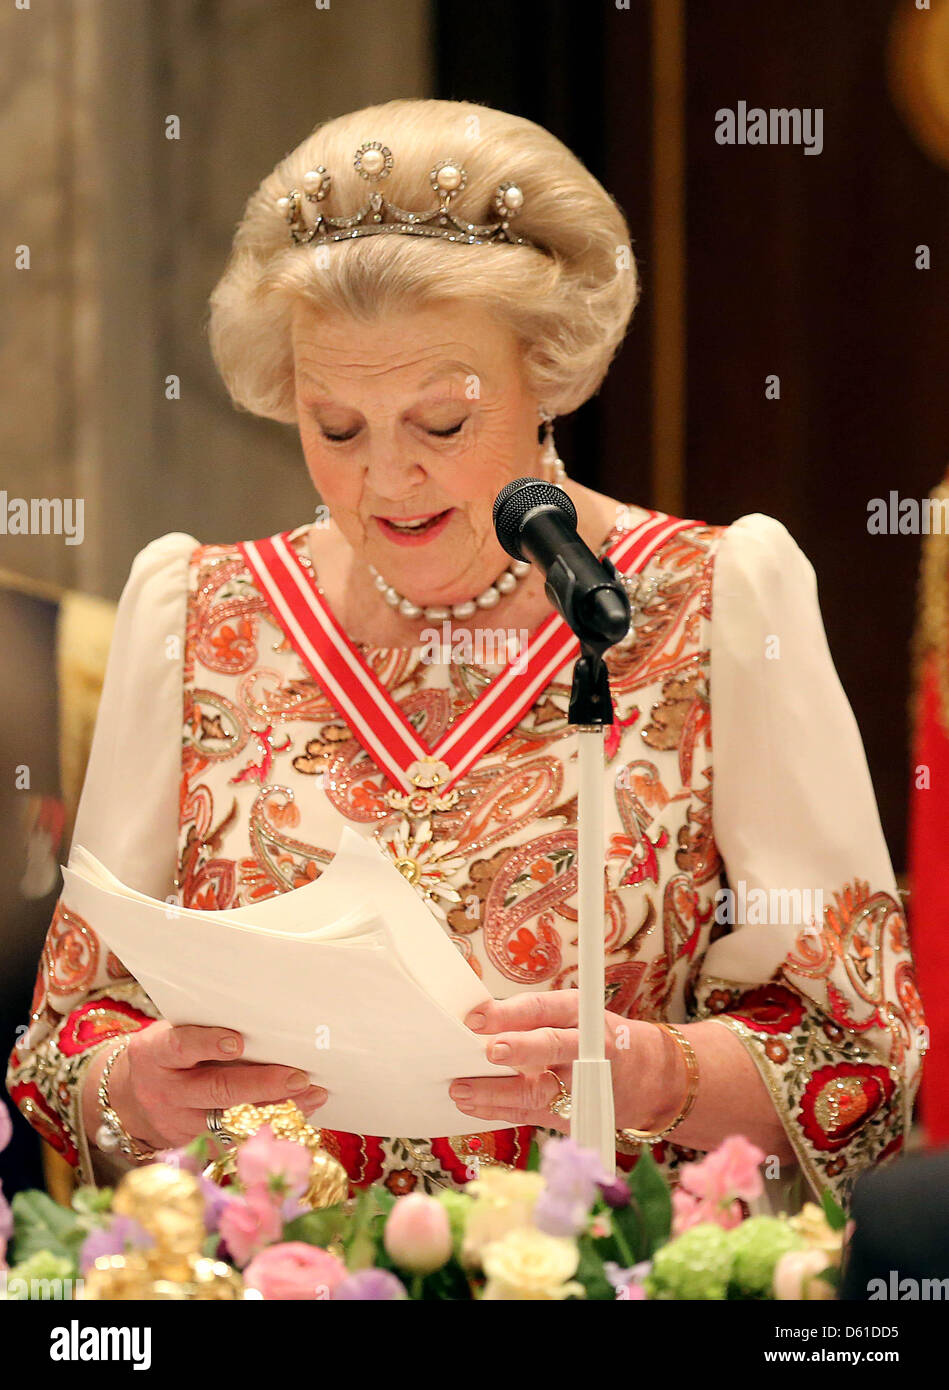 Dutch Queen Beatrix speaks at the state banquet for the Turkish President and his wife in the Royal Palace in Amsterdam, The Netherlands, 17 April 2012. The Turkish president is on a three-day state visit to the Netherlands. Pool: Nieboer/Reni van Maren  NETHERLANDS OUT Stock Photo